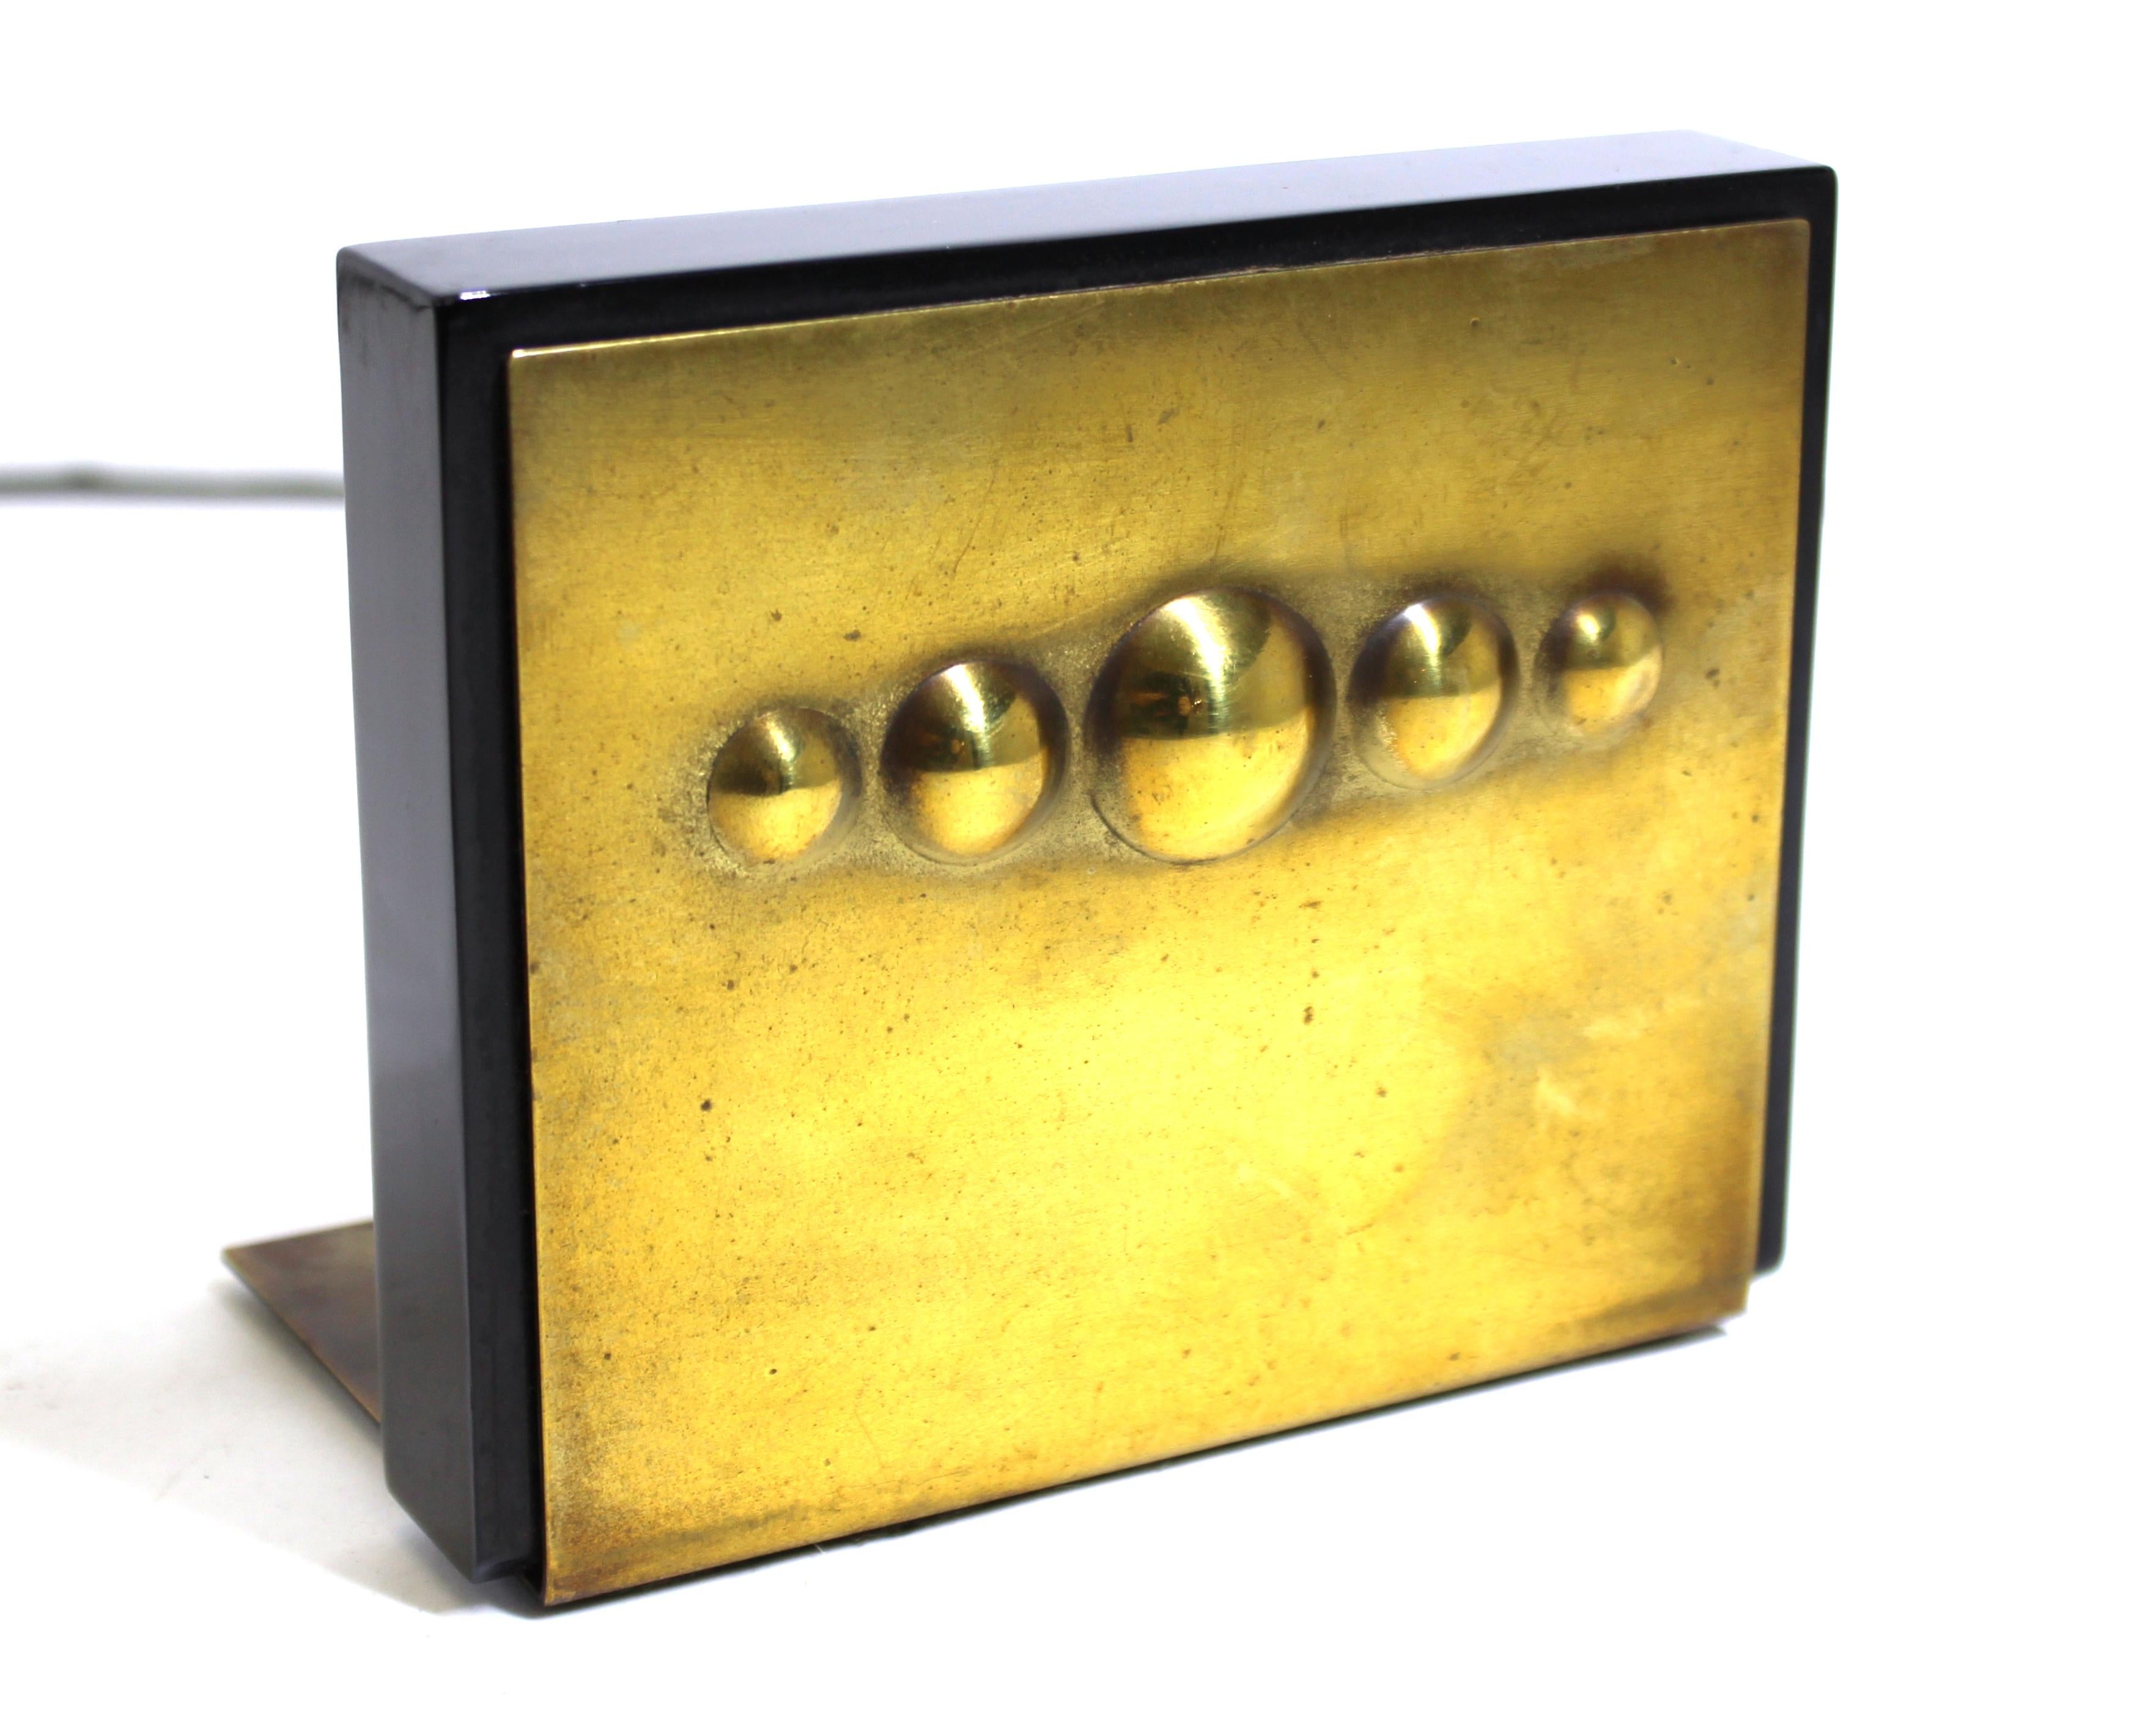 American Modernist Bookends in Solid Bakelite and Brass 1